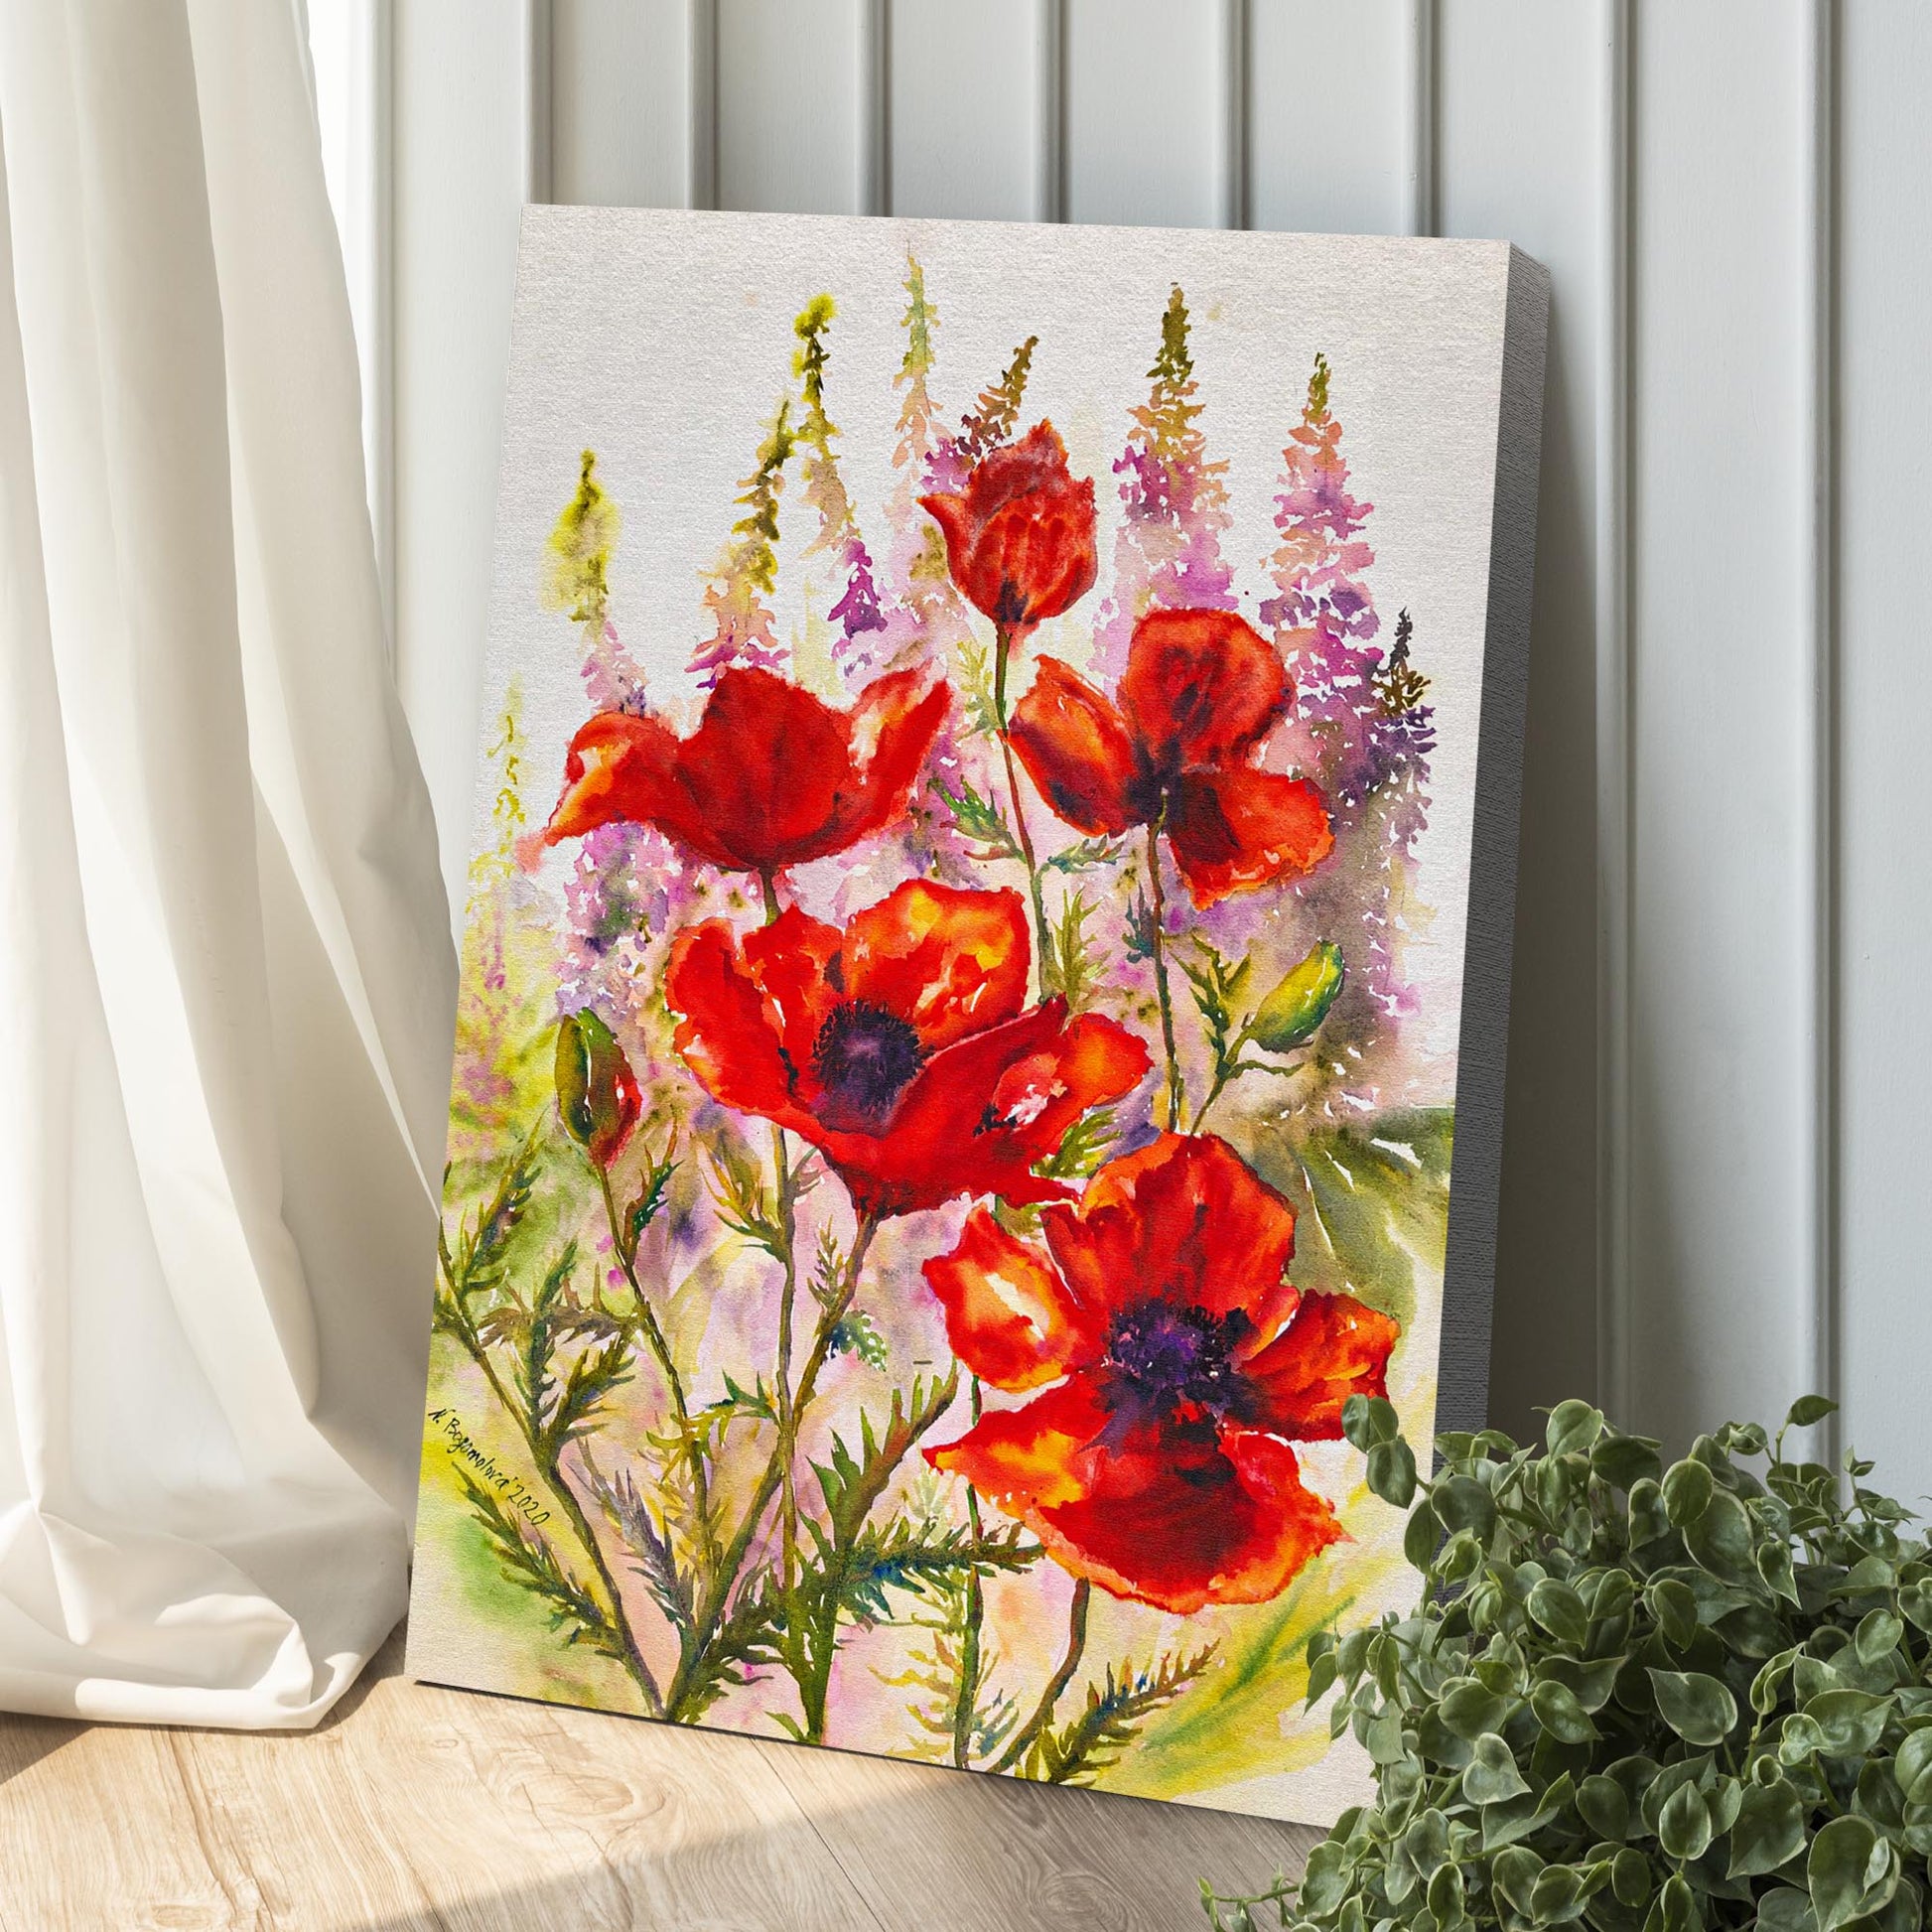 Red Poppies Melody Canvas Wall Art Style 1 - Image by Tailored Canvases